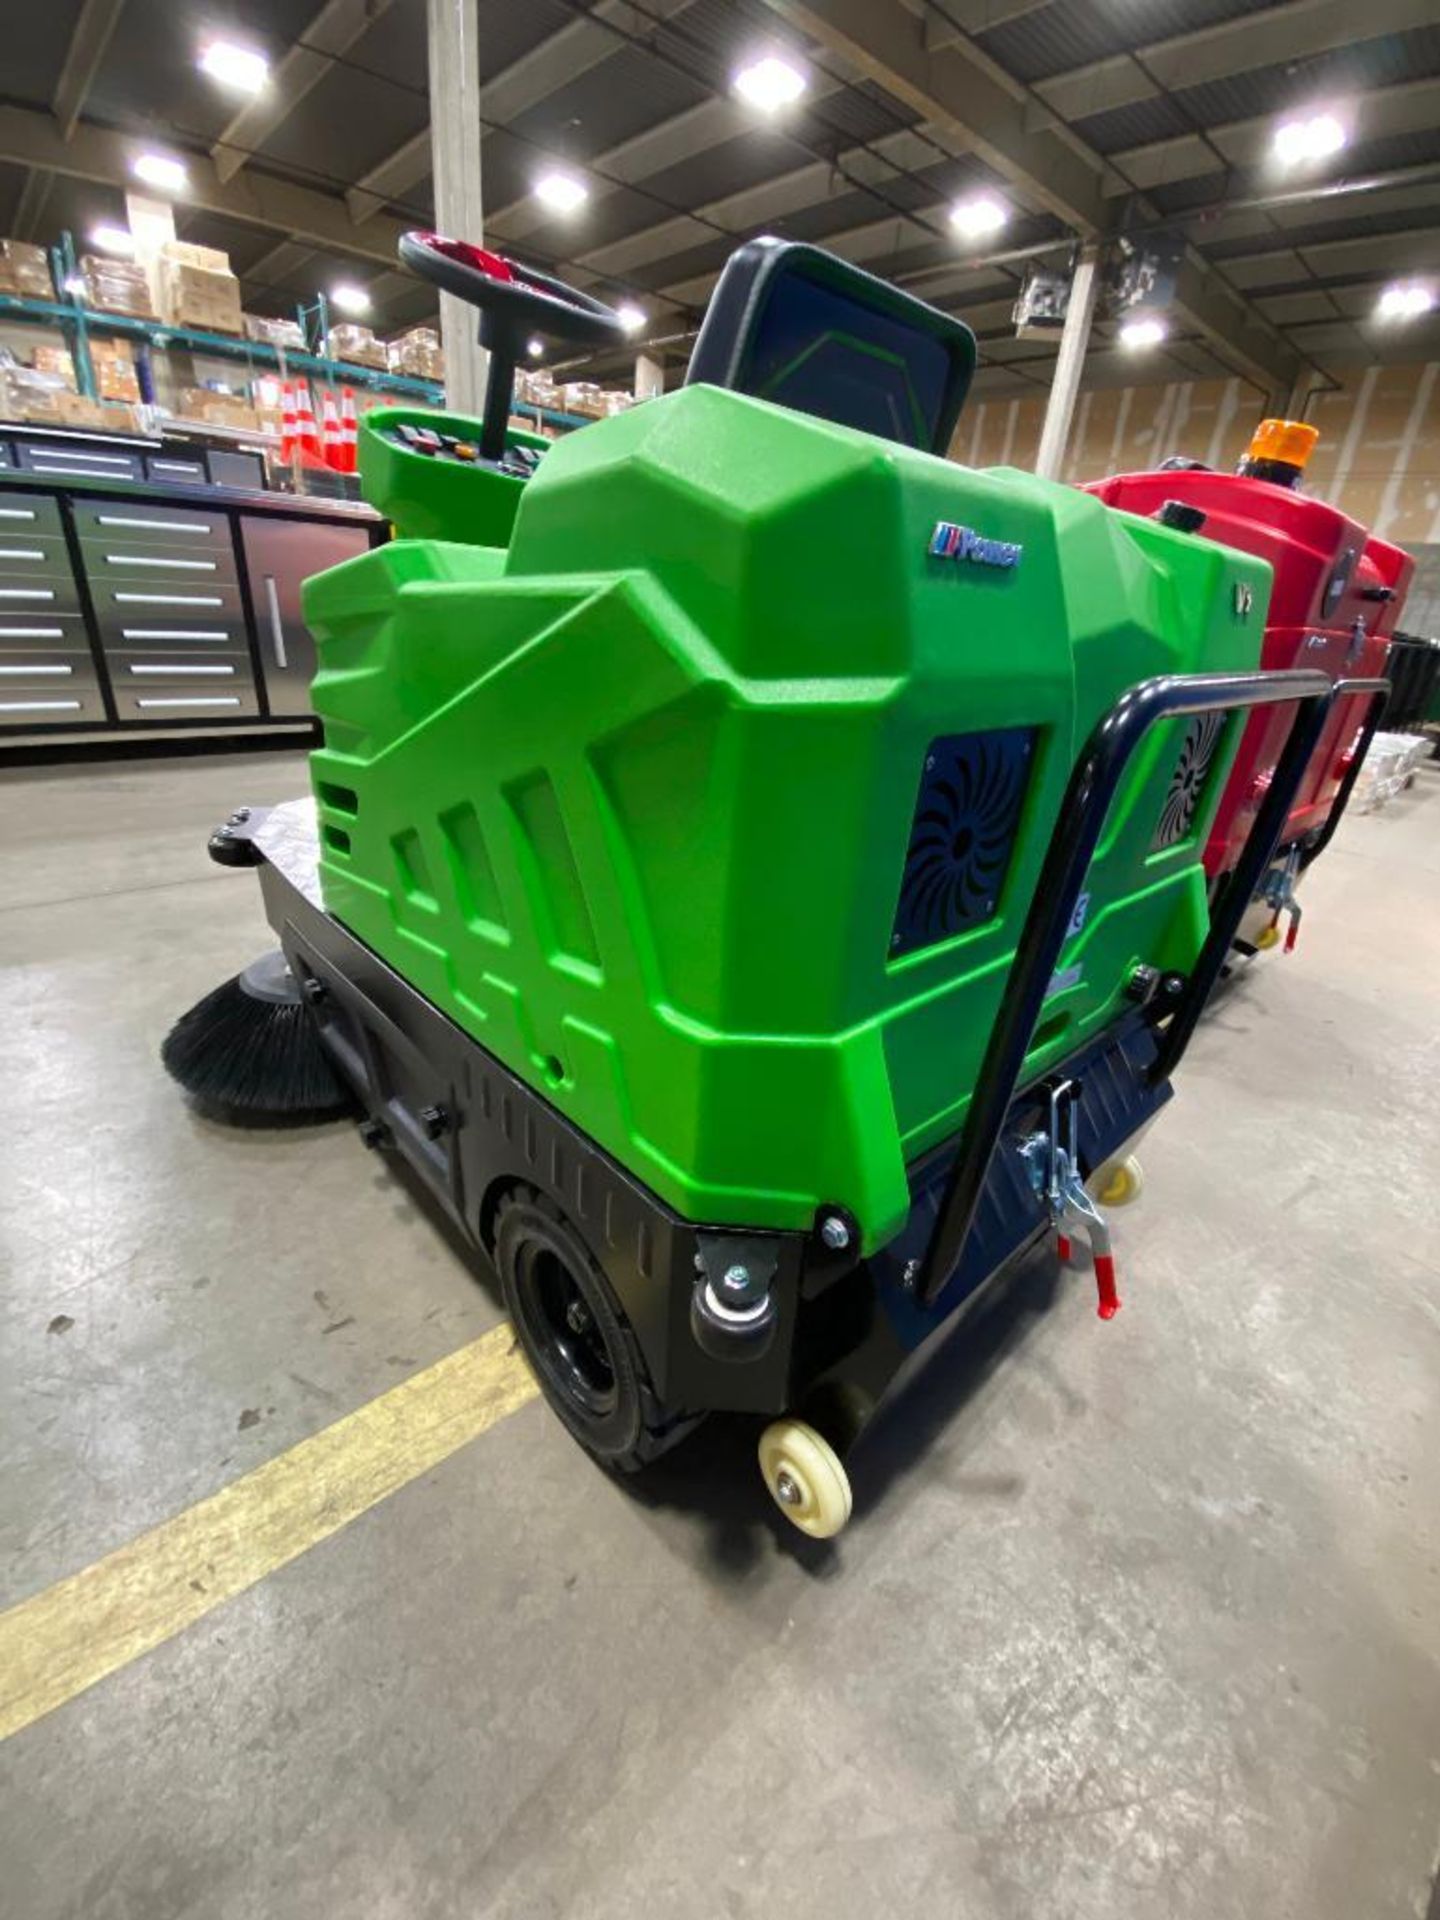 New 2022 aokeqi 0S-V1 43" Wide Ride-On Electric Industrial Floor Sweeper - Image 4 of 10